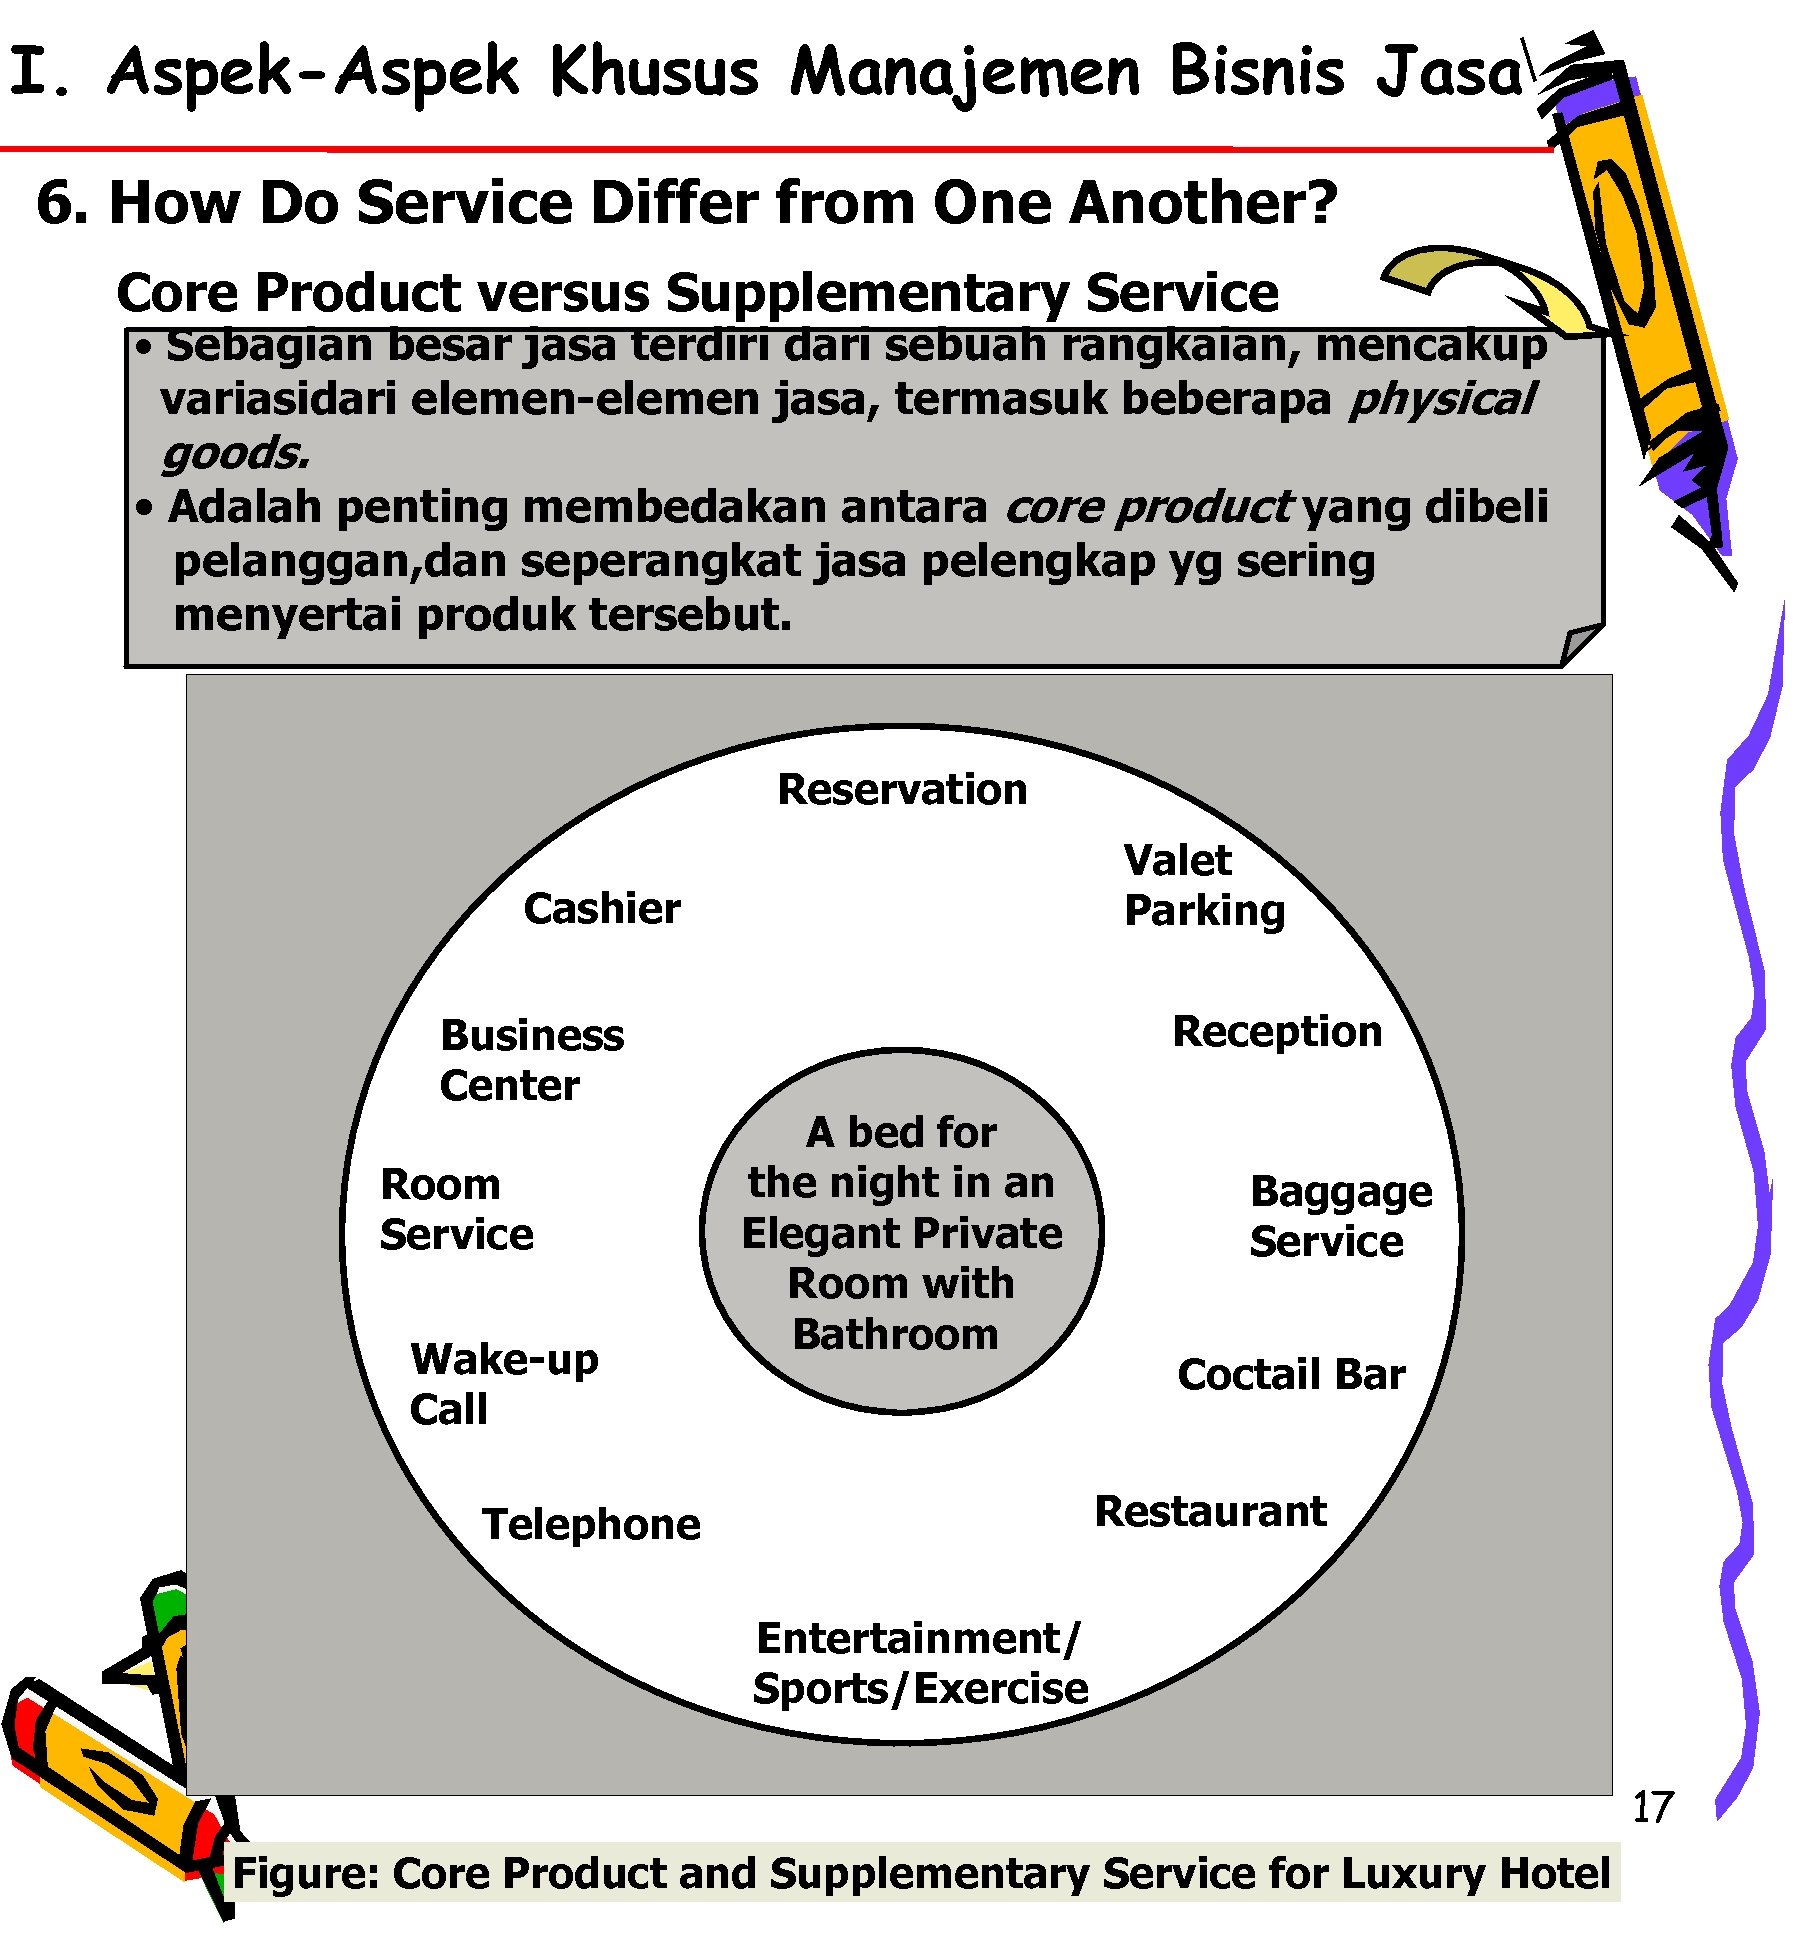 I. Aspek-Aspek Khusus Manajemen Bisnis Jasa 6. How Do Service Differ from One Another?